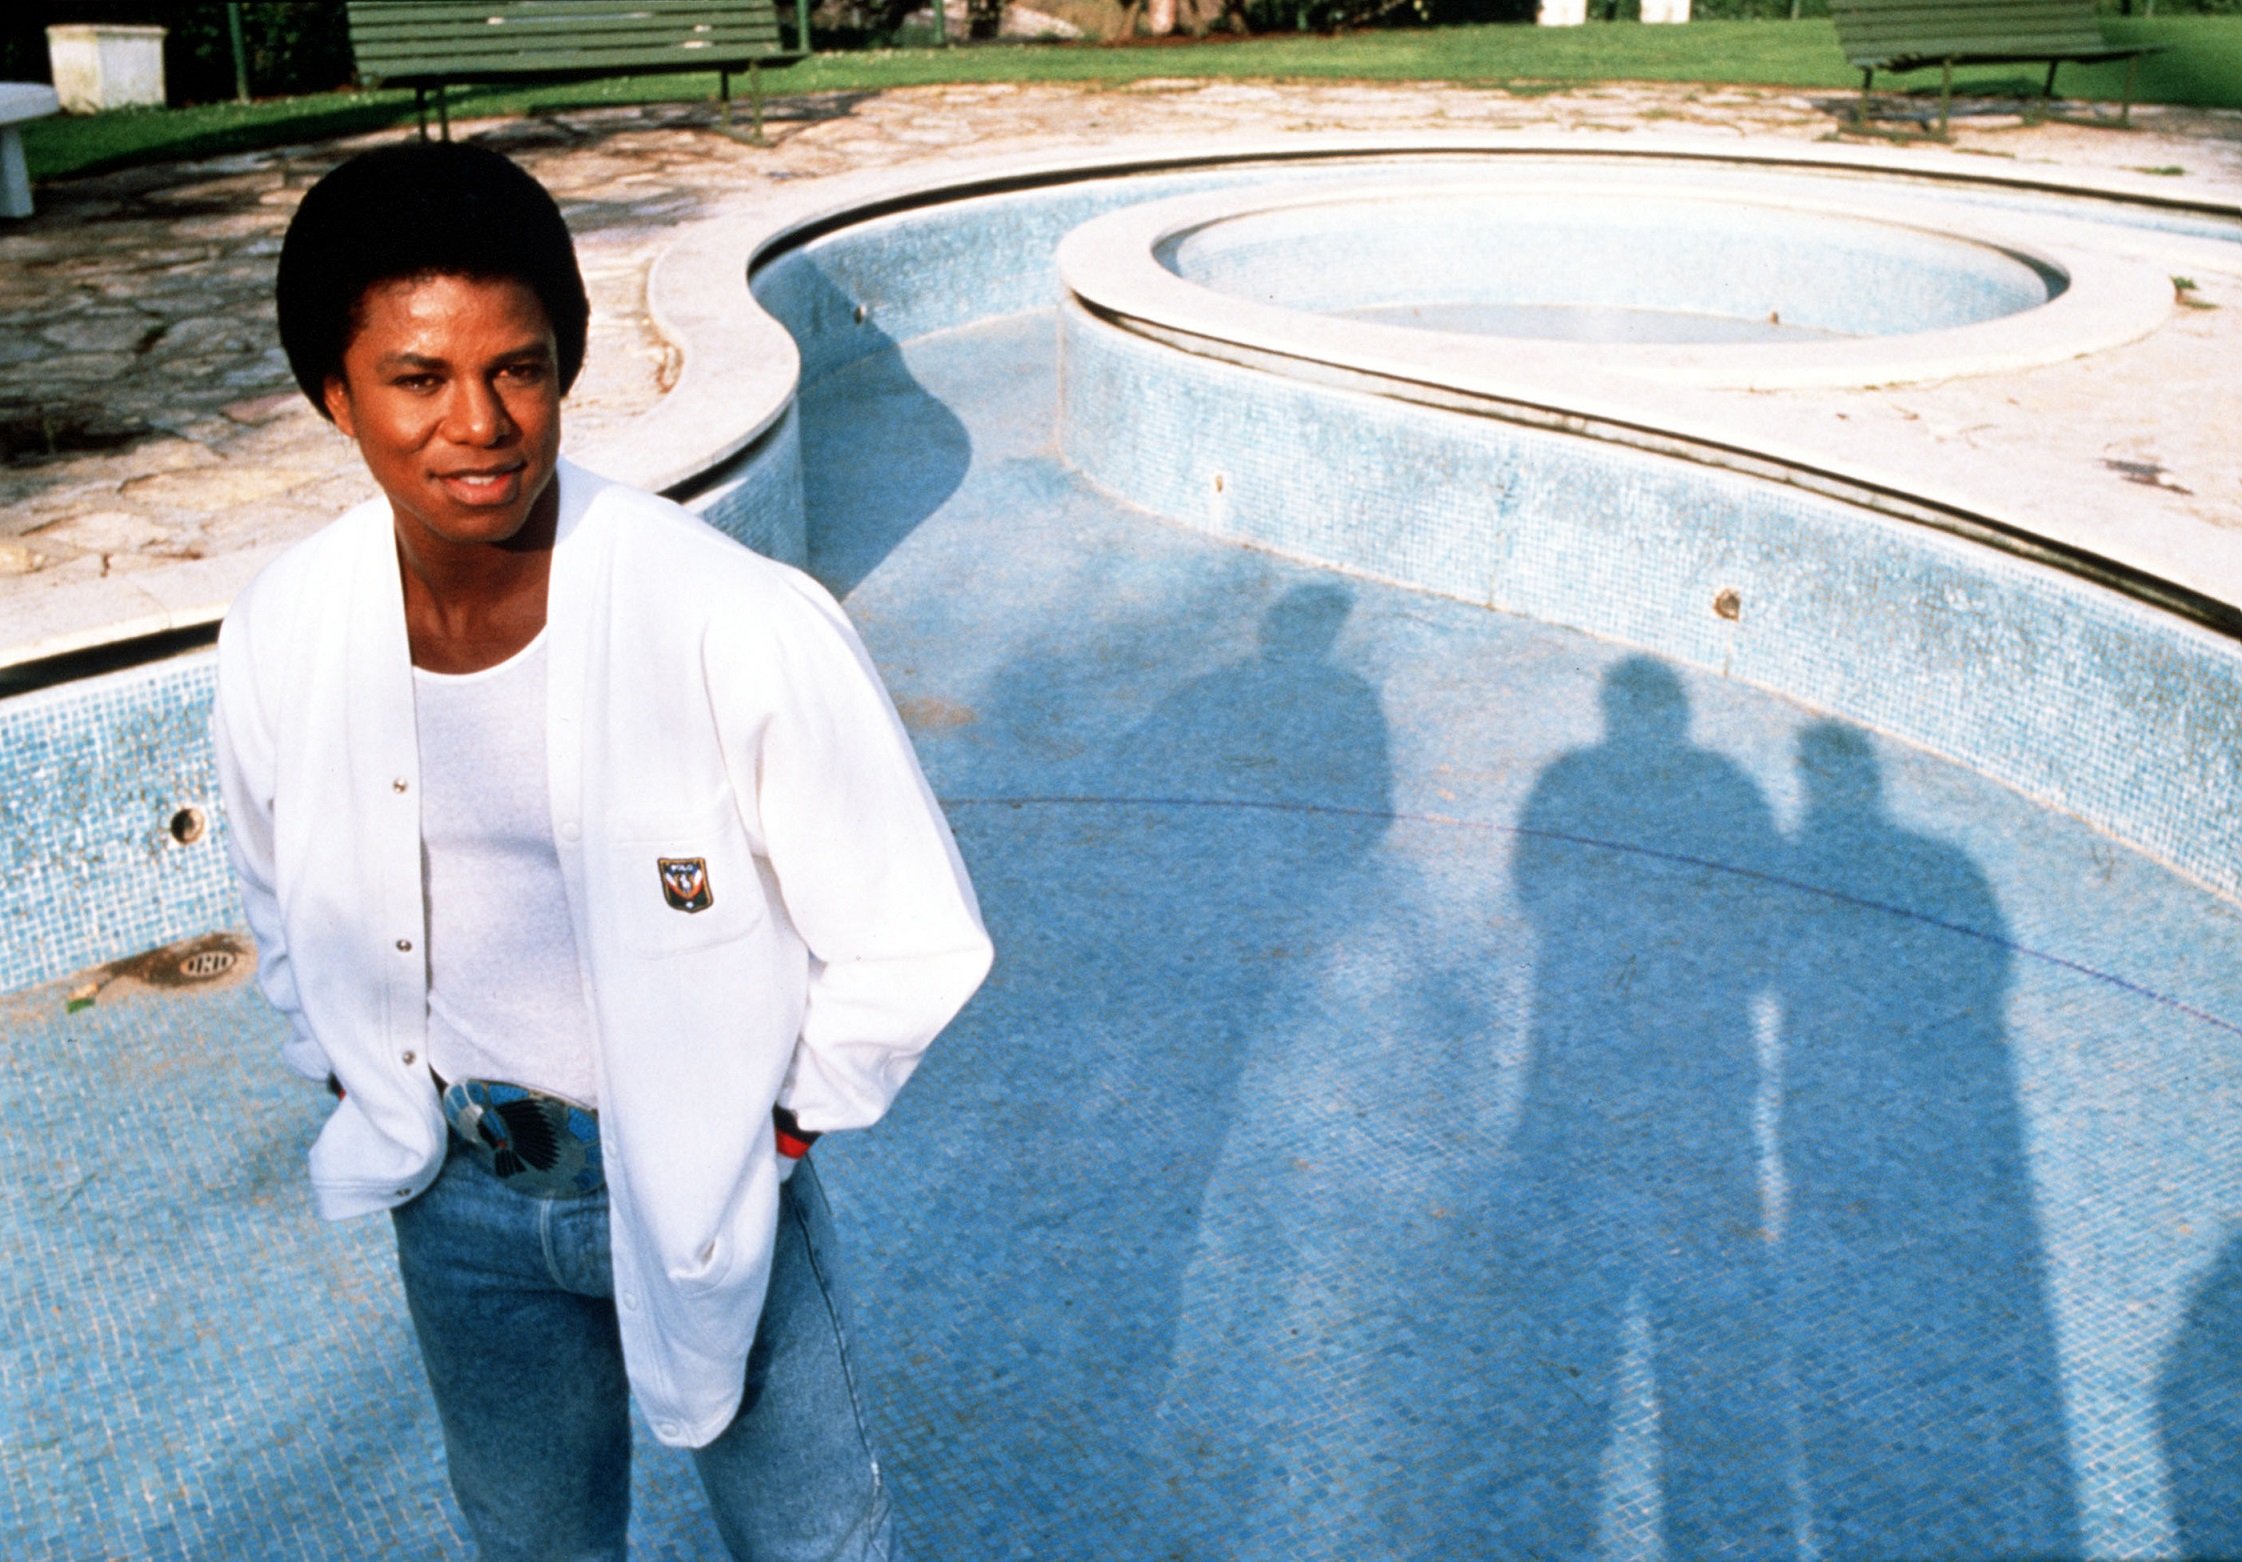 Jermaine Jackson with his hands in his pockets